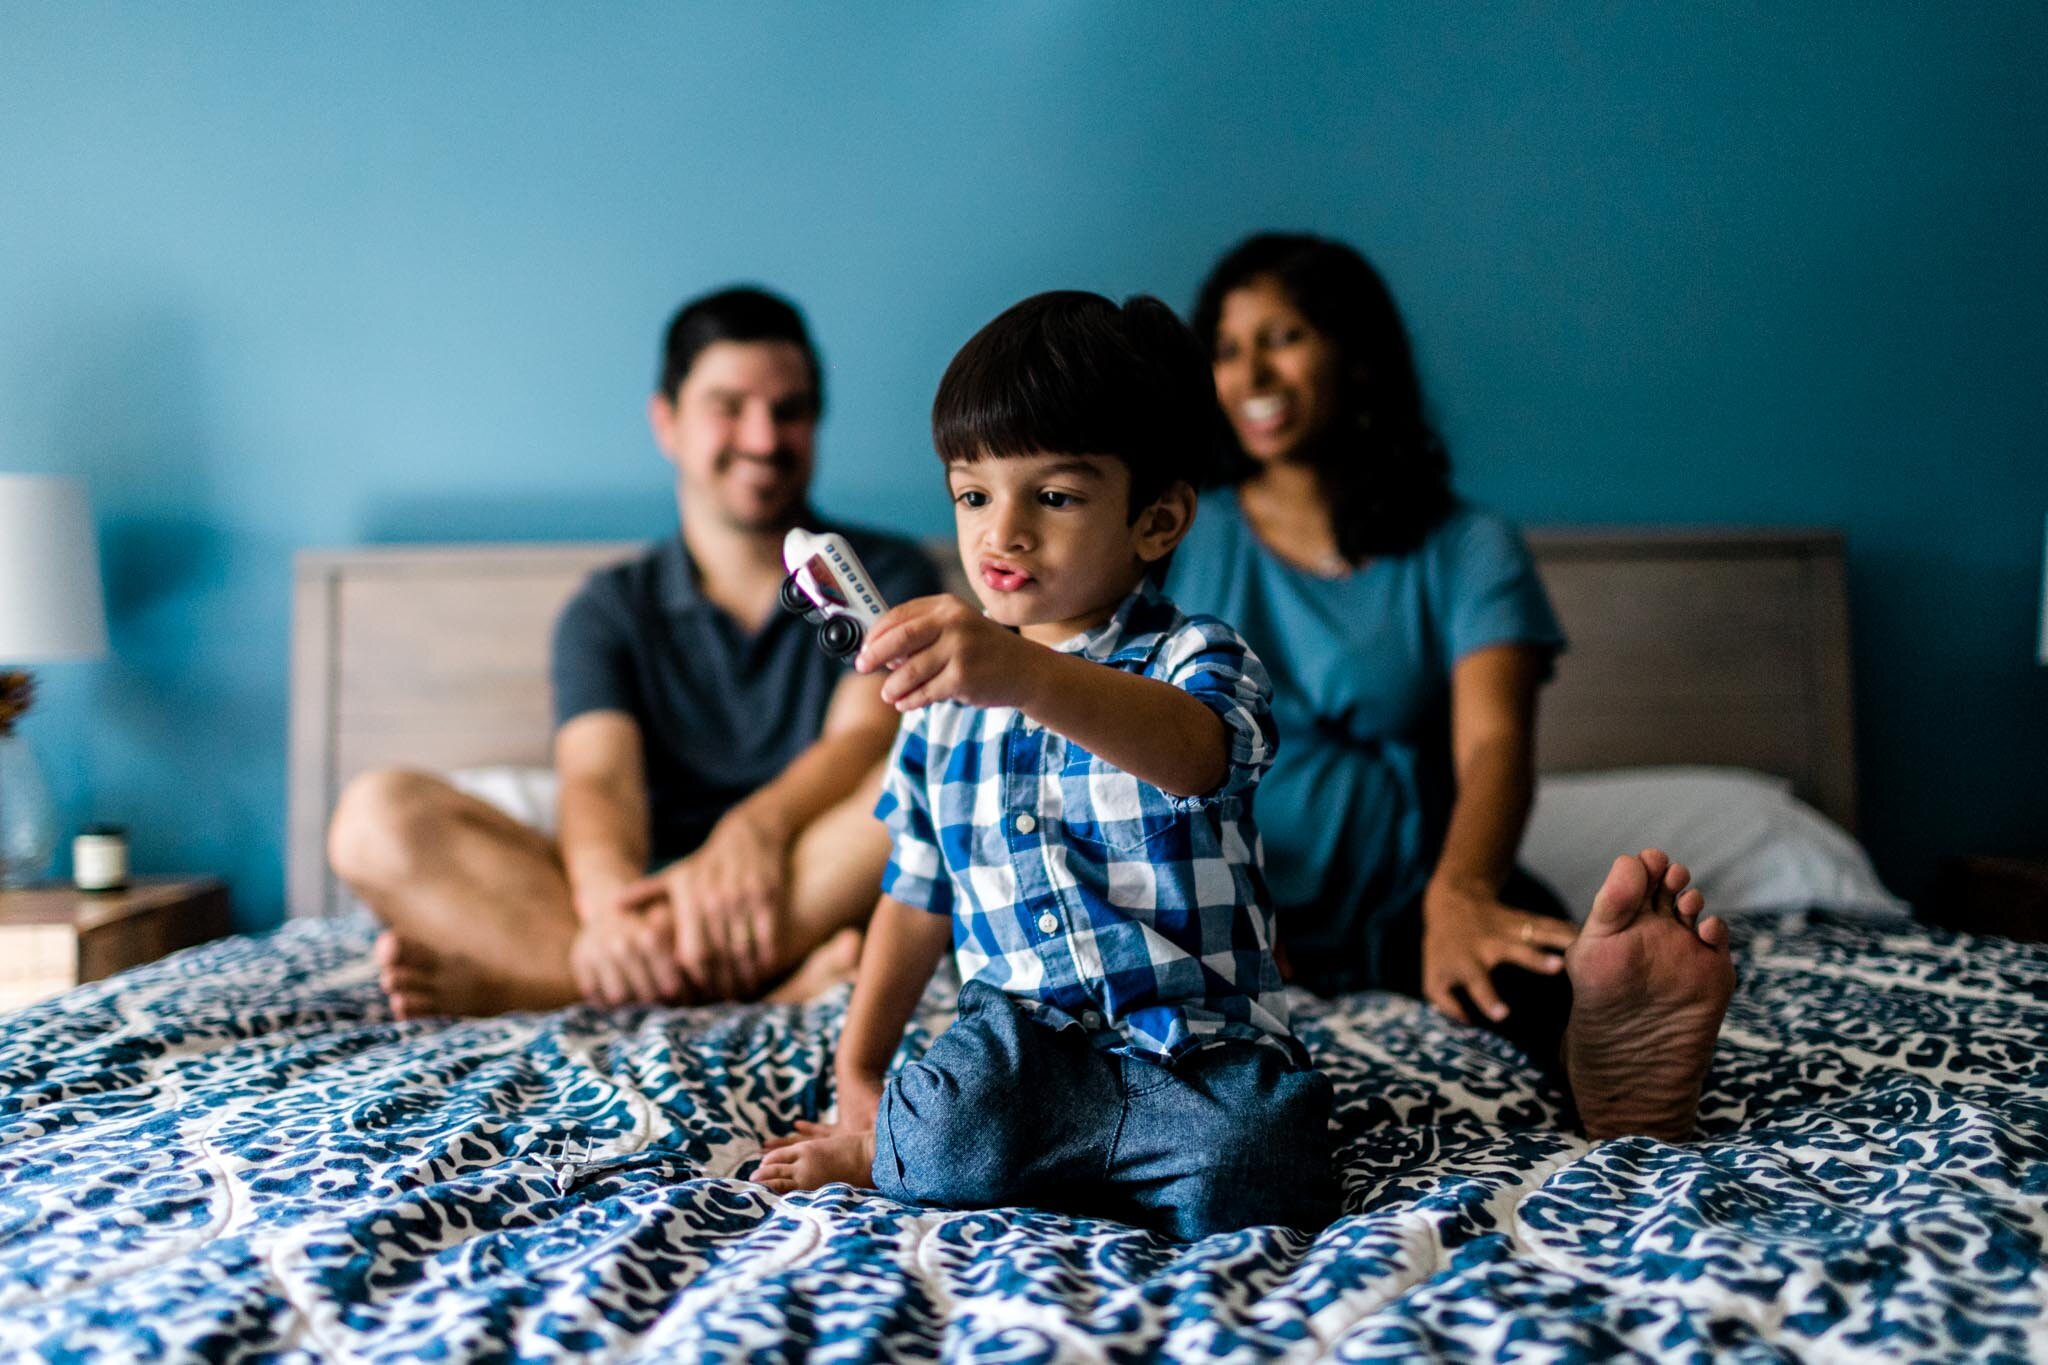 Raleigh Family Photographer | By G. Lin Photography | Boy playing with airplanes with family on bed